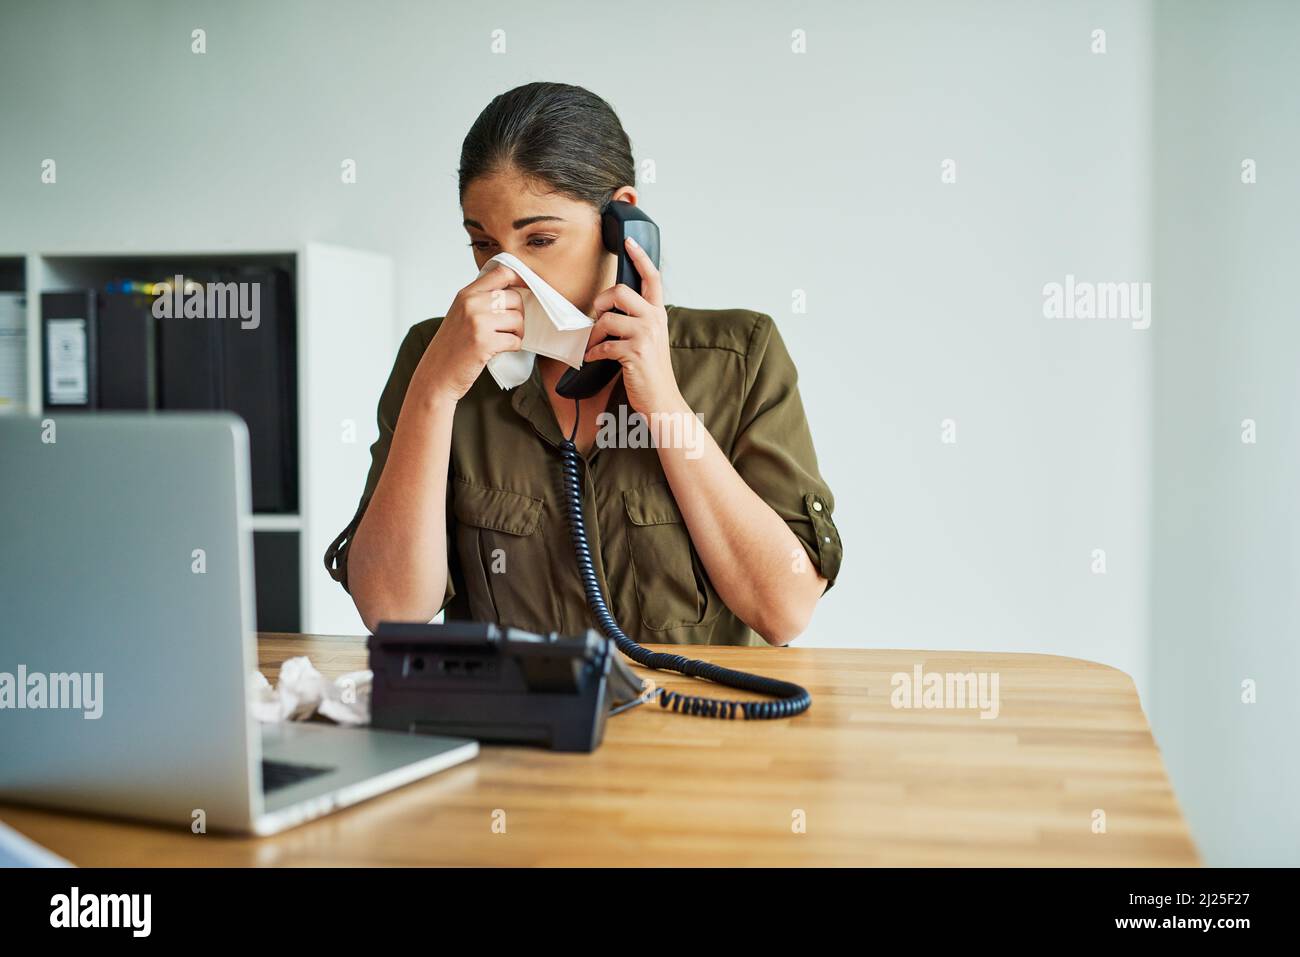 Its an unbearable condition to work in. Shot of a young businesswoman blowing her nose while speaking on a phone in an office. Stock Photo